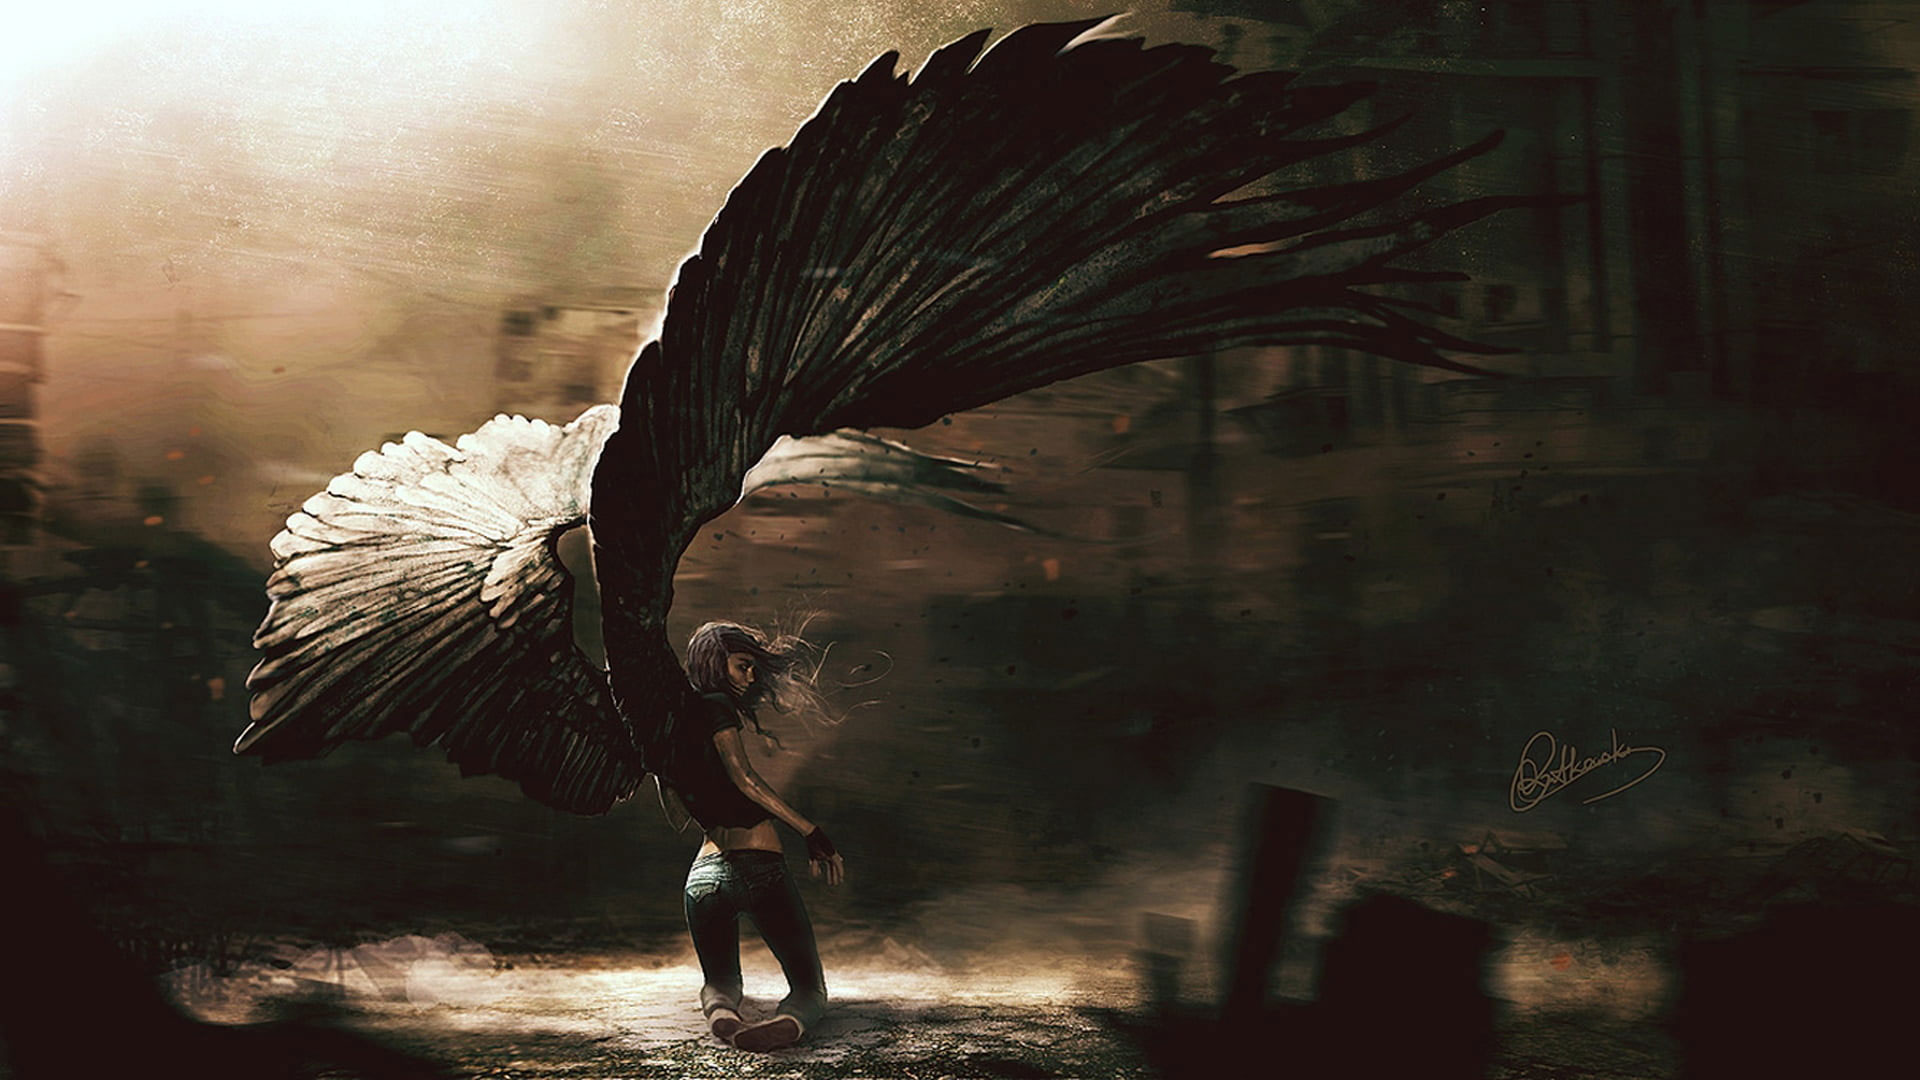 Wallpaper Black Angel Wallpaper, Woman With Wings Painting